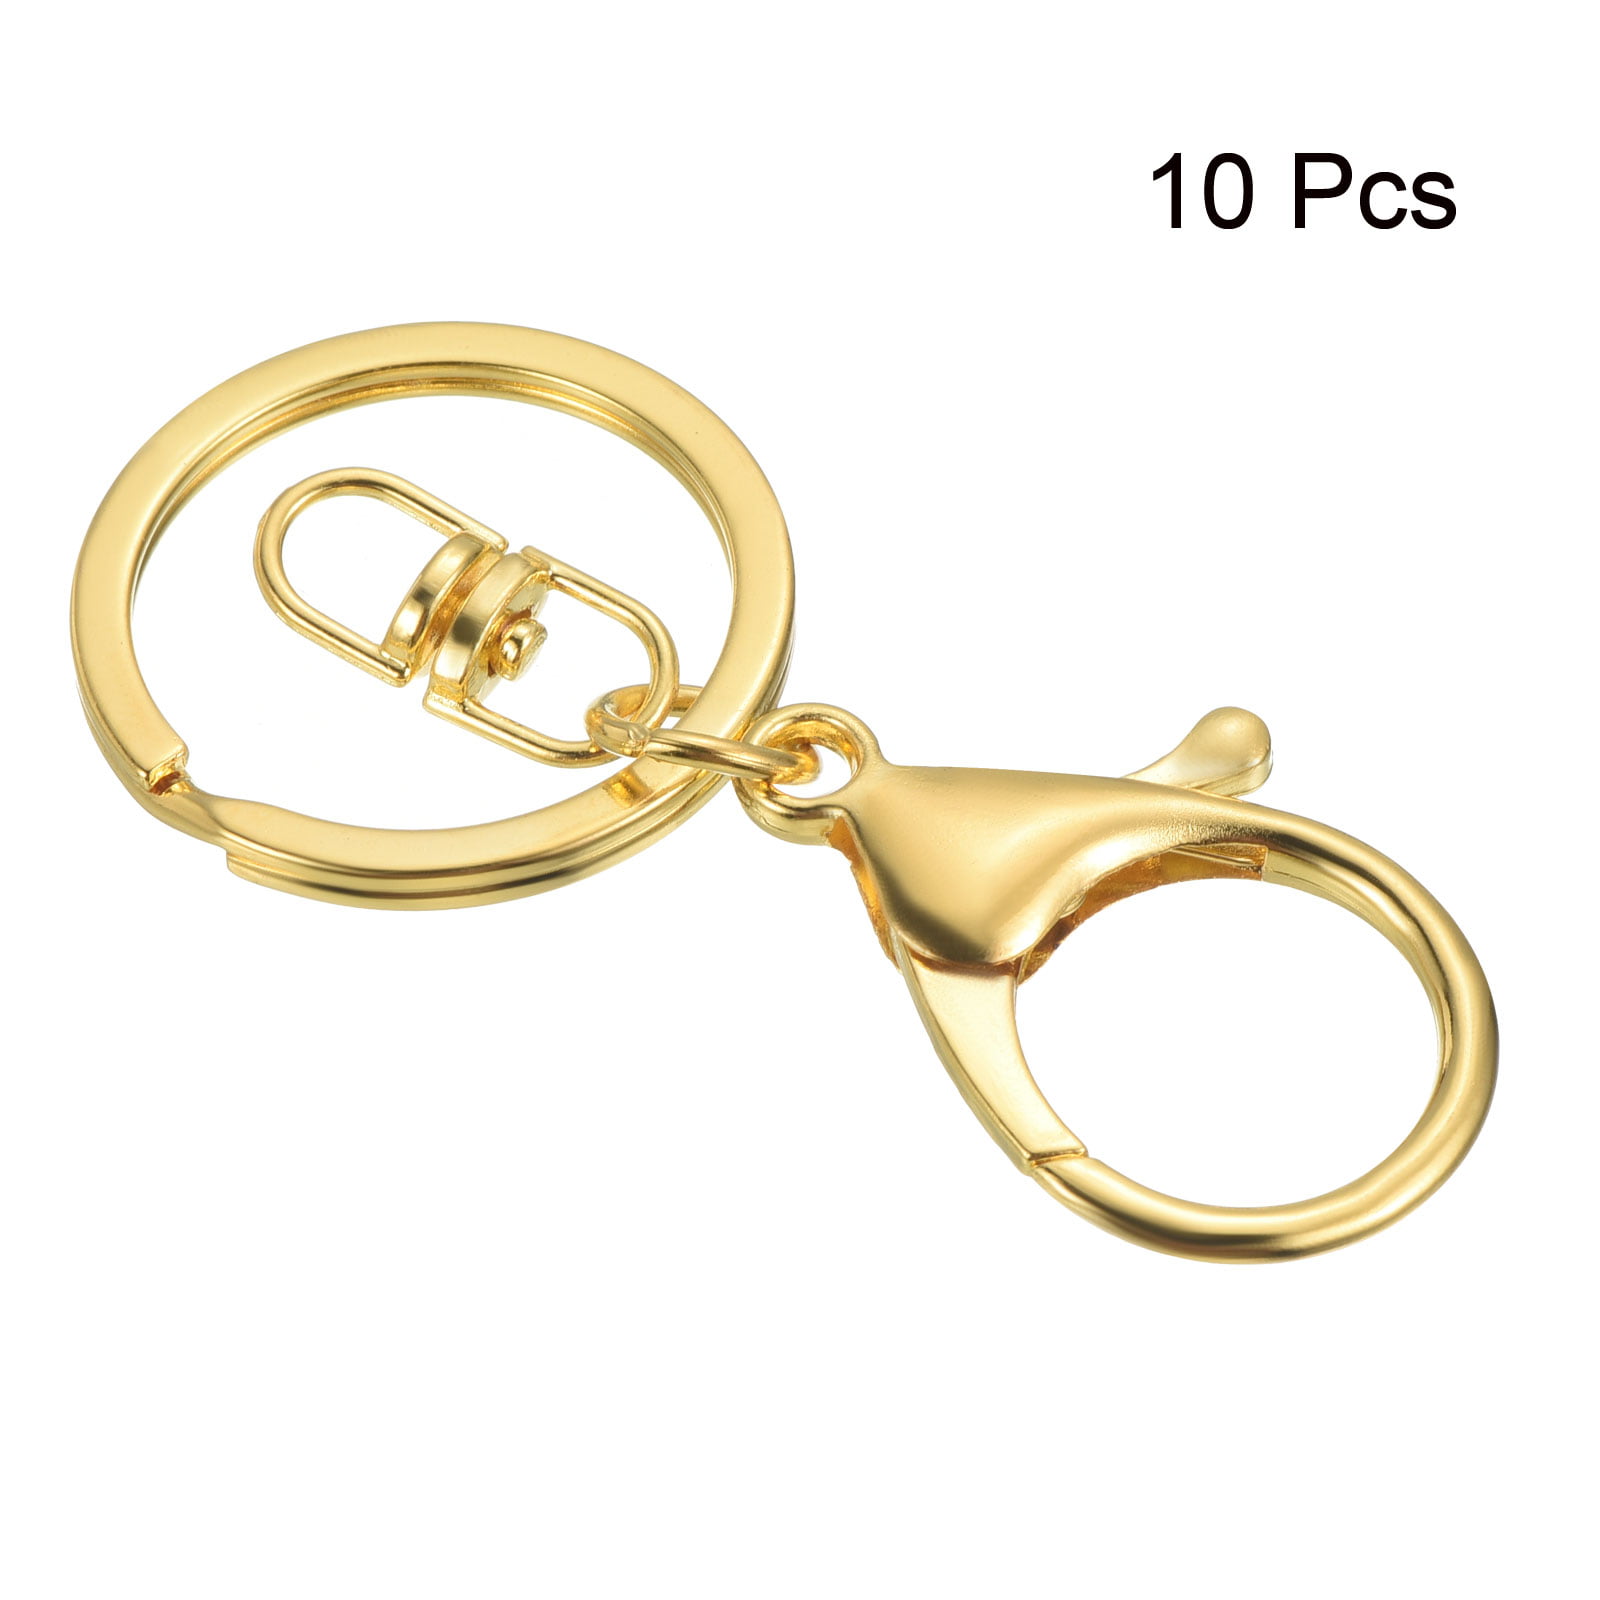 5 Rose Gold Key Chains With Heart Clasp, Swivel Lobster Key Chain Clasp  Fin1070 -  Denmark